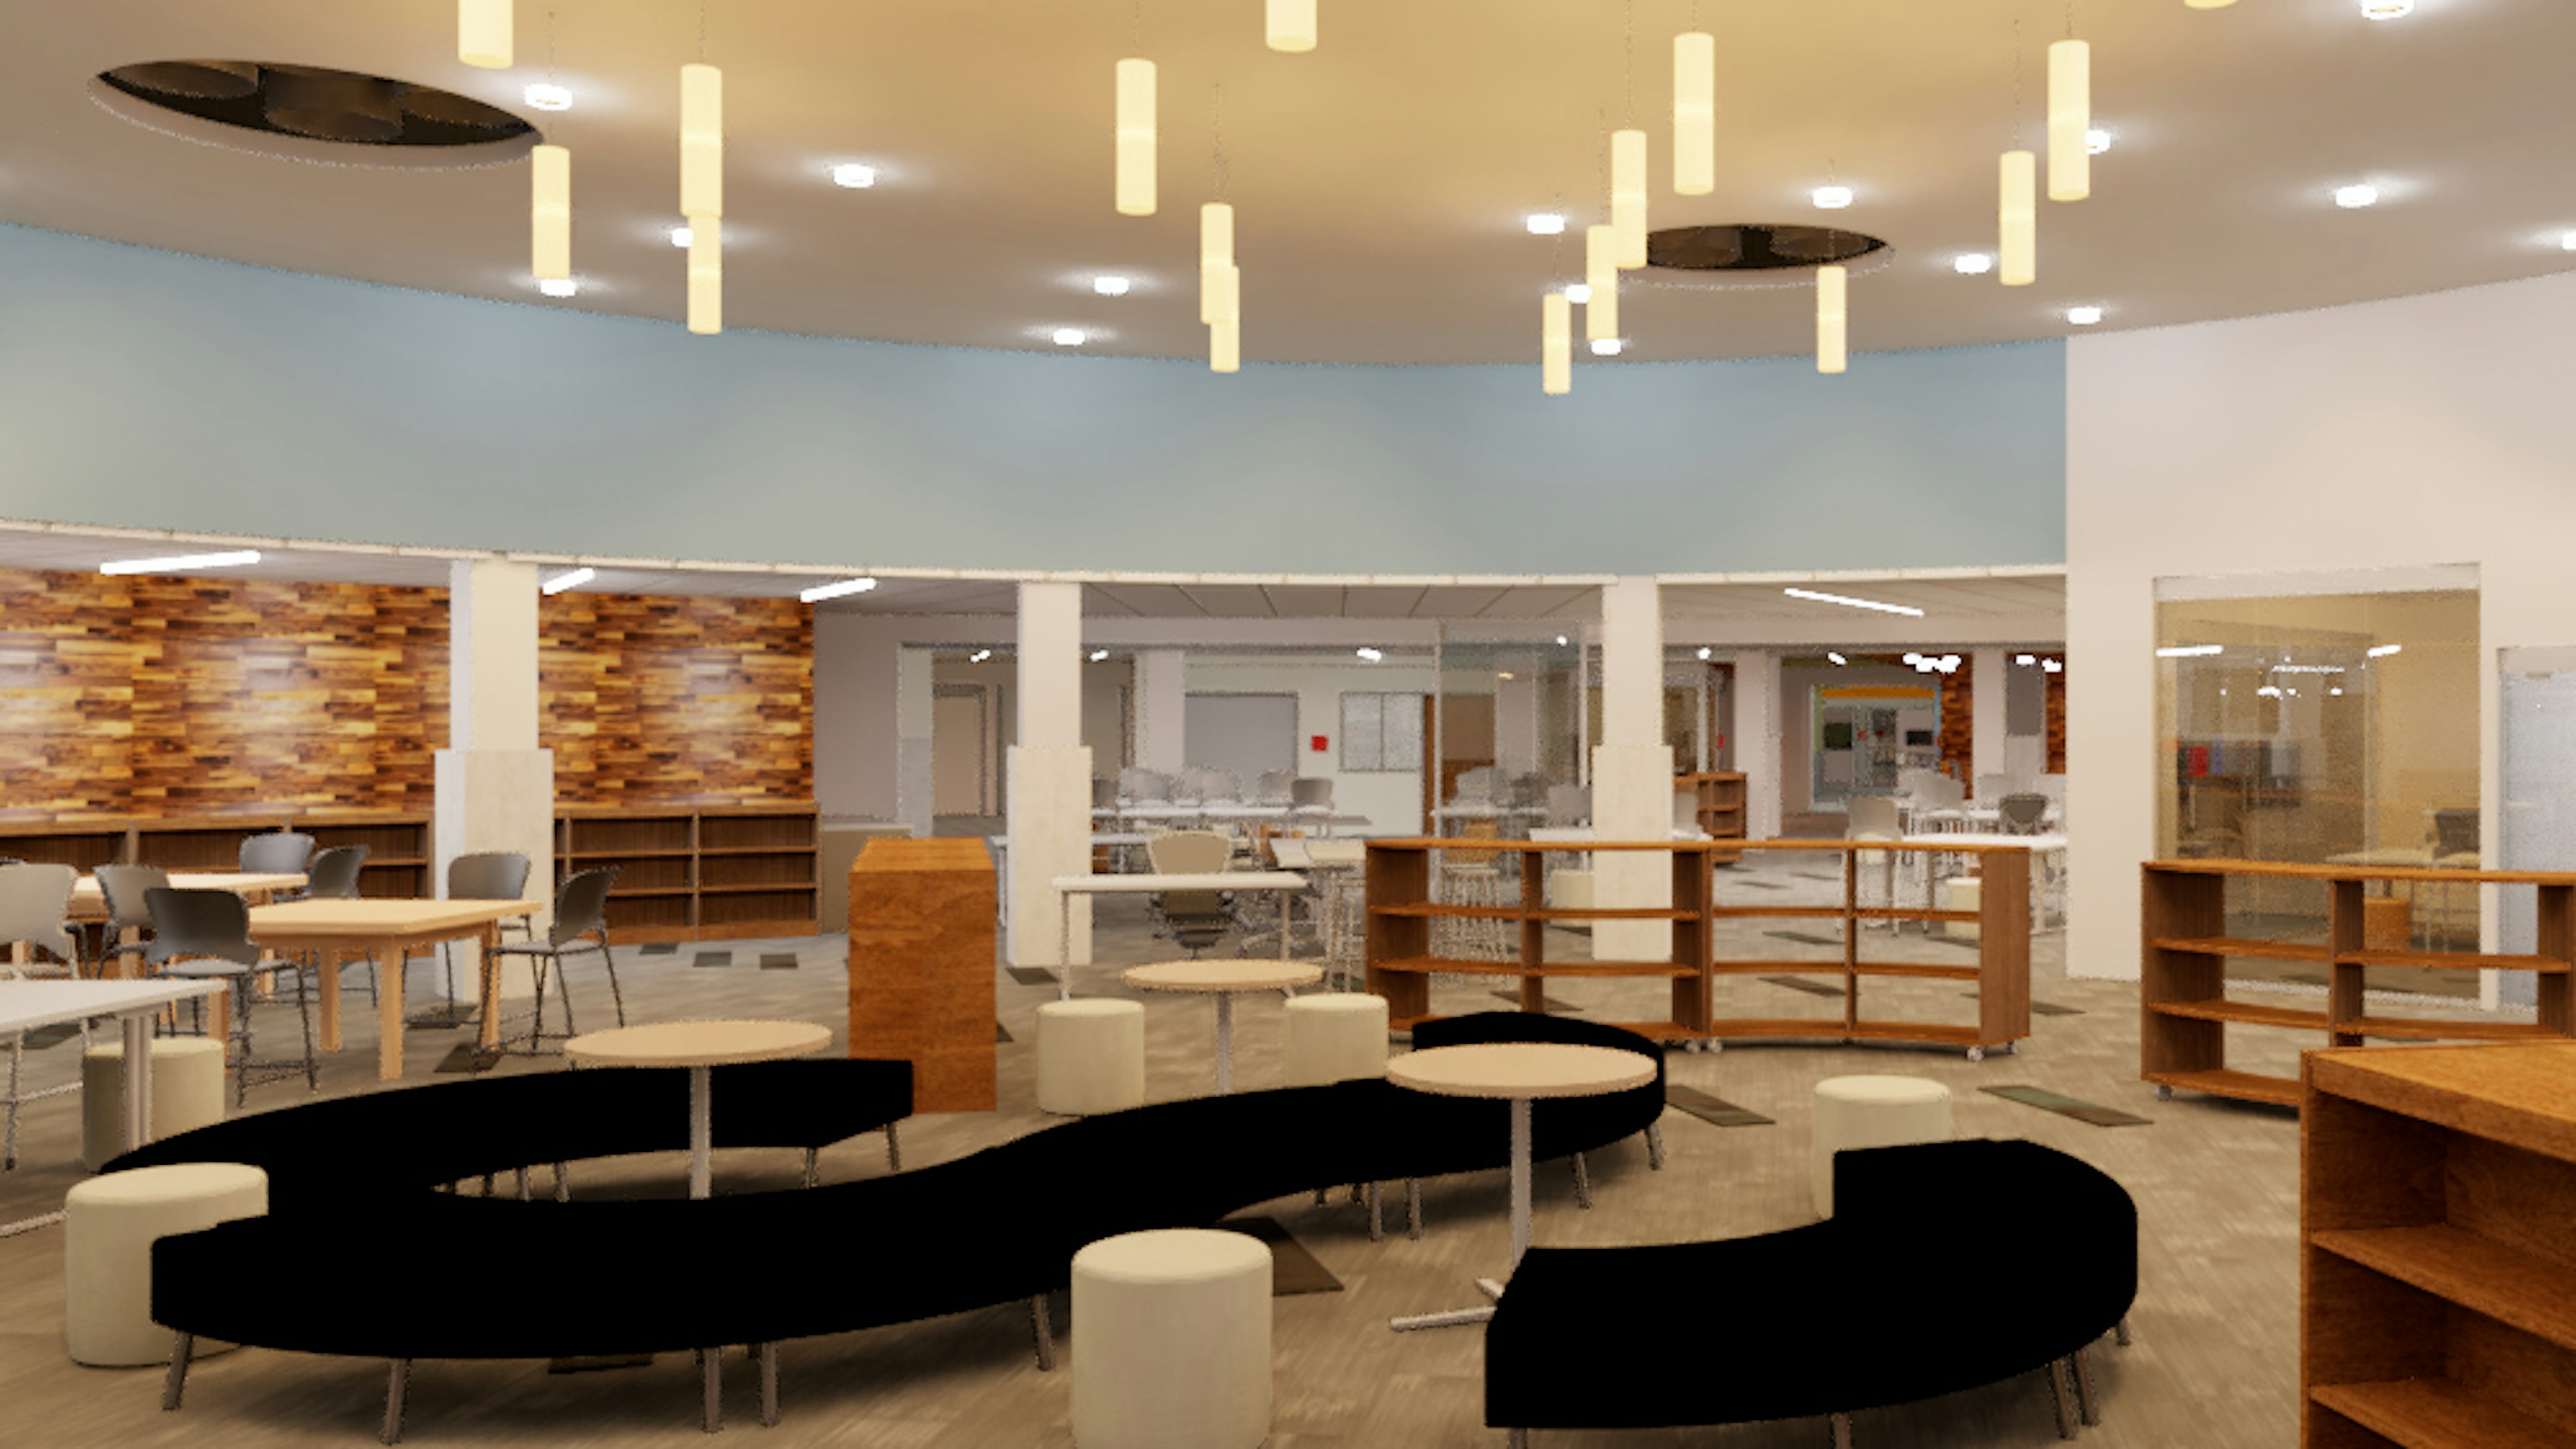 FINAL LEARNING COMMONS CENTER